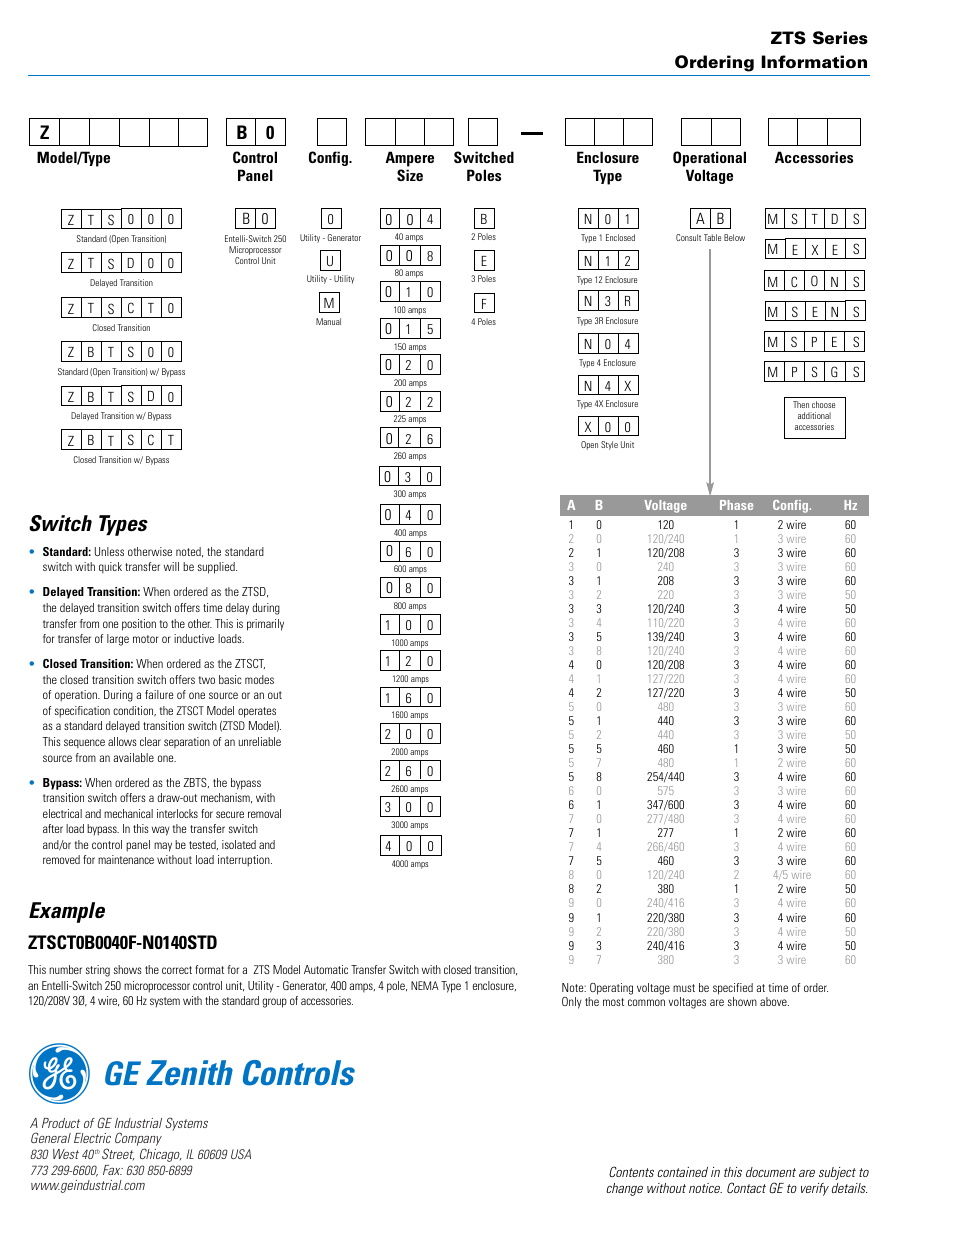 Zenith controls, Example, Switch types | Zts series ordering information | GE Zenith ZTS Series User Manual | Page 10 / 10